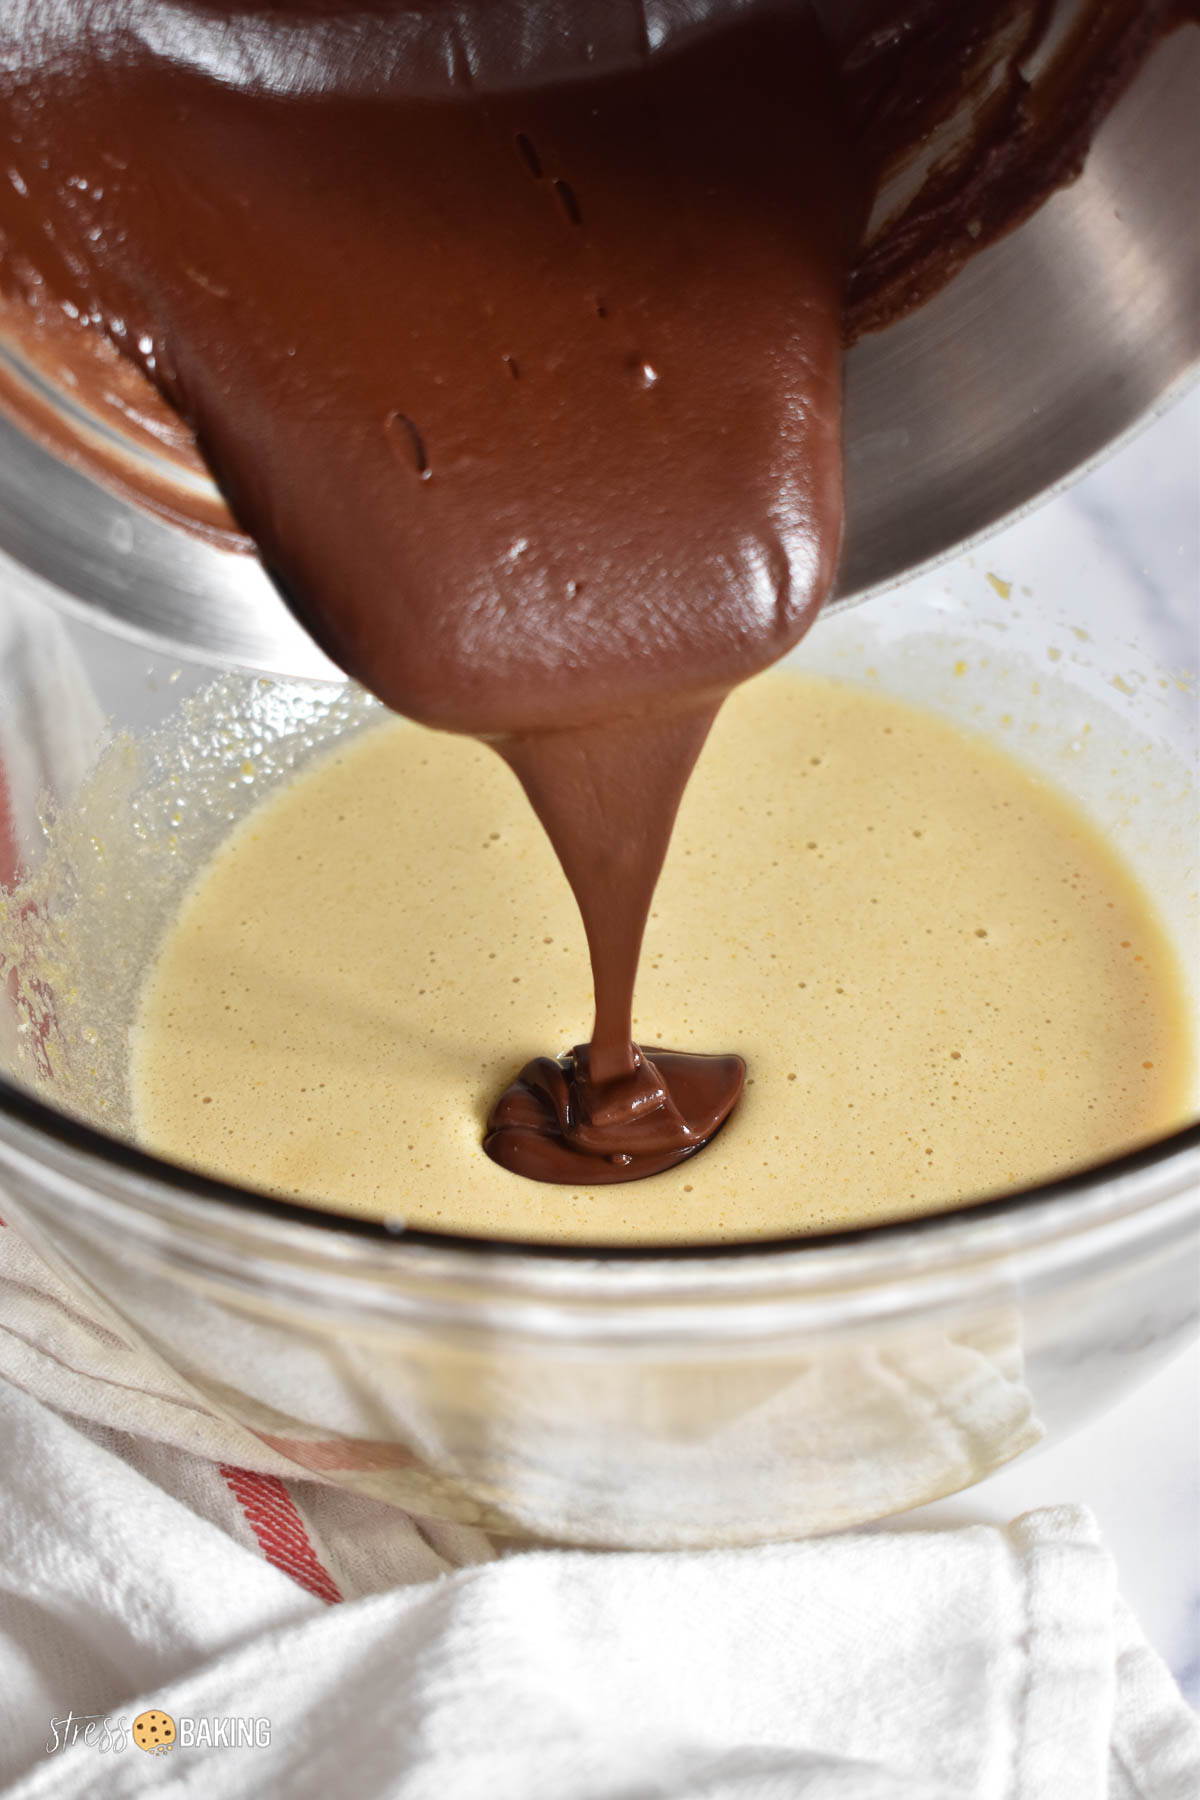 Melted chocolate being poured into yellow batter